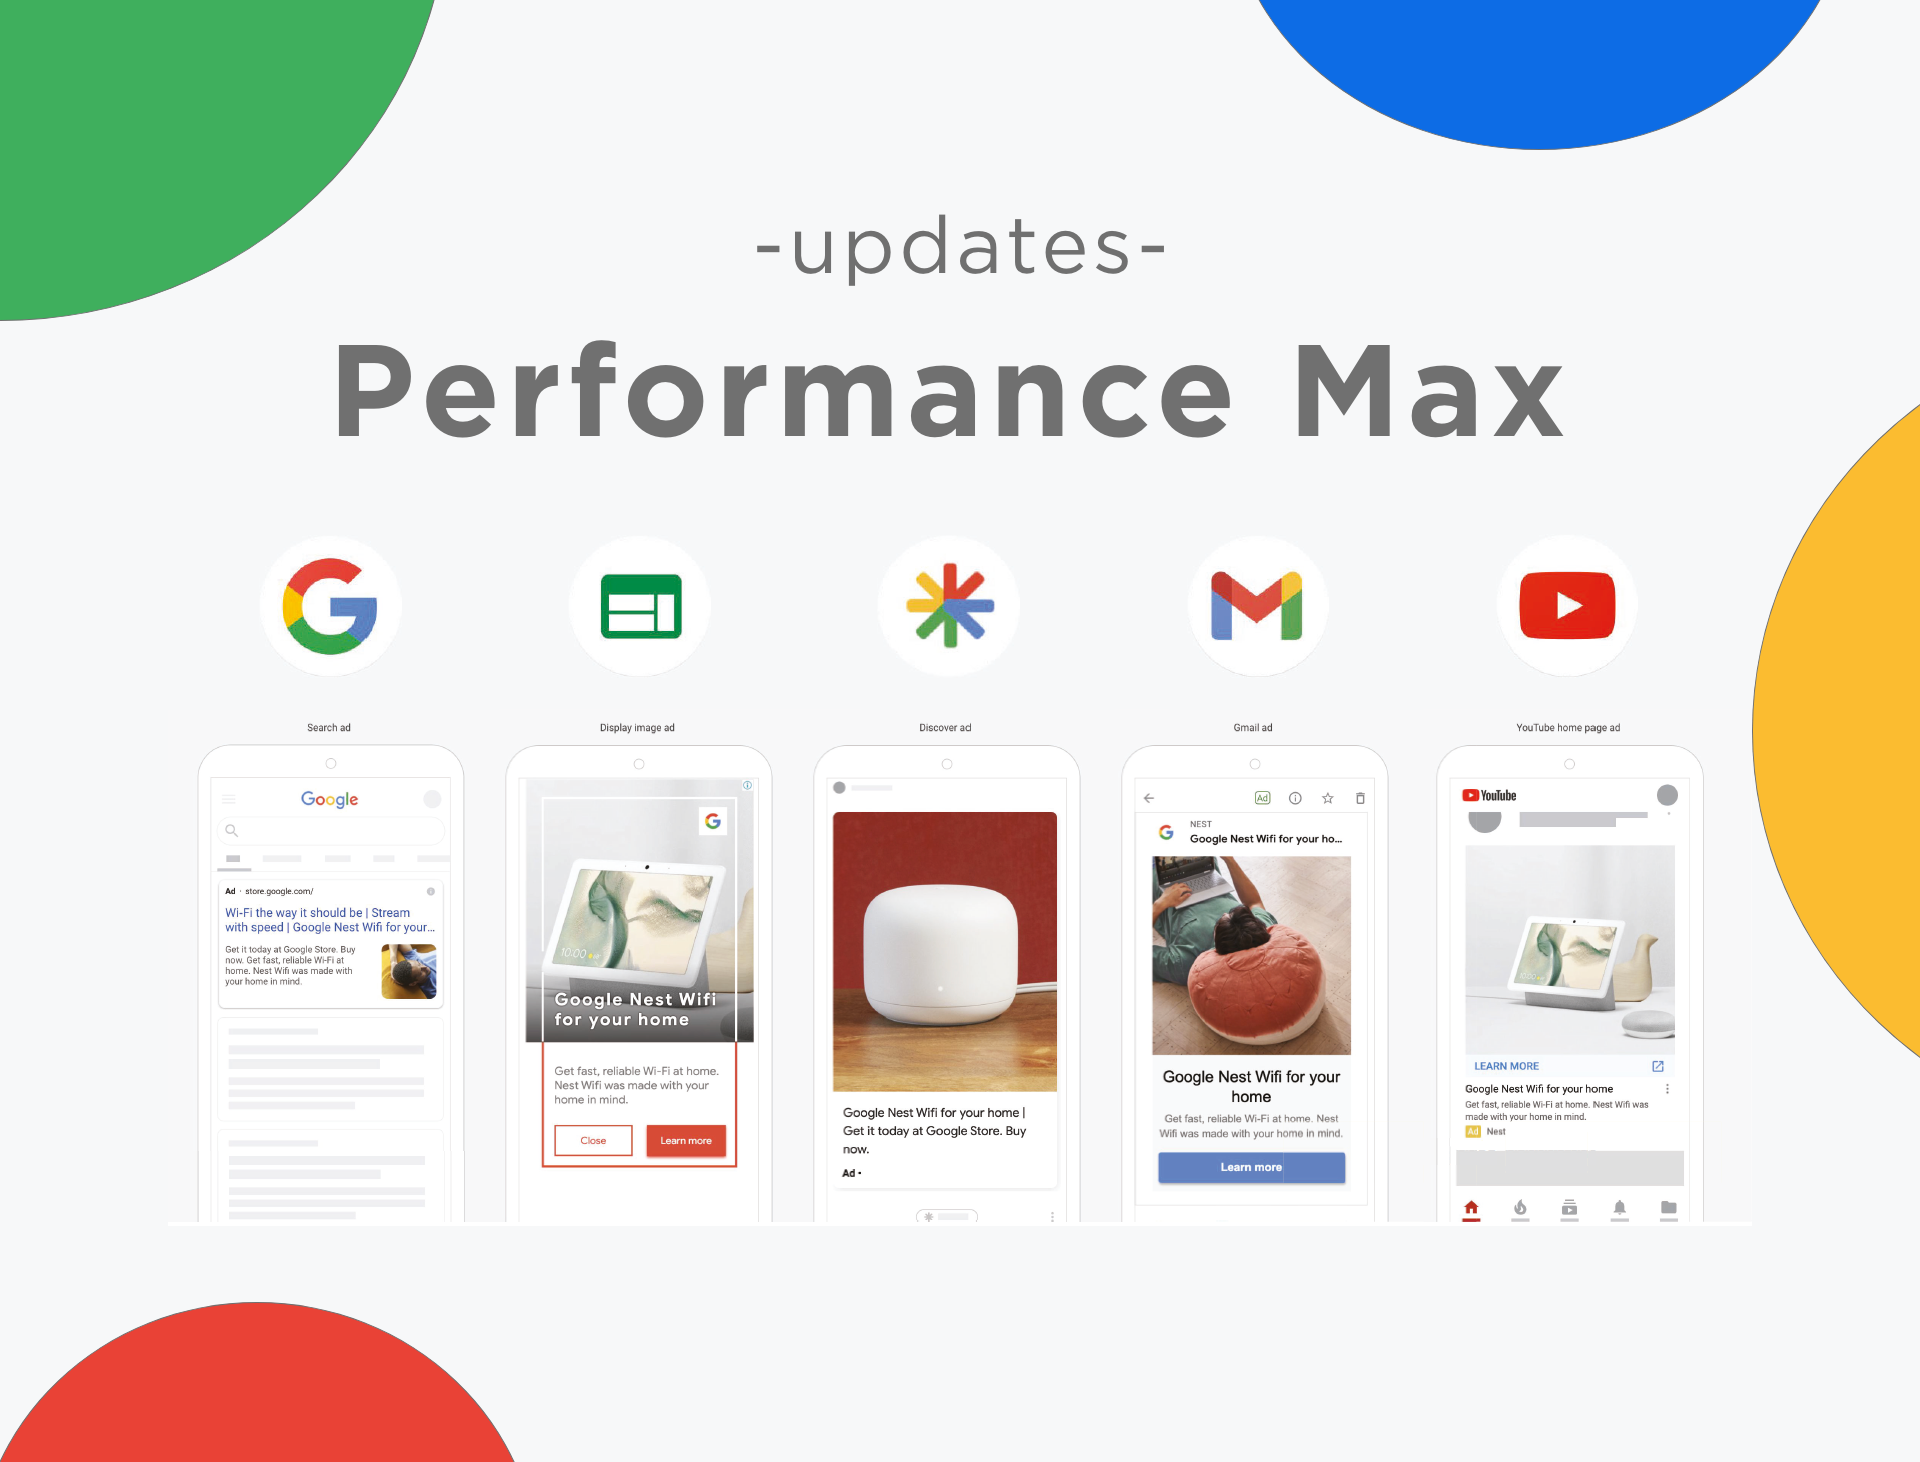 Performance Max Campaigns Drives Growth In Google Ads Revenue